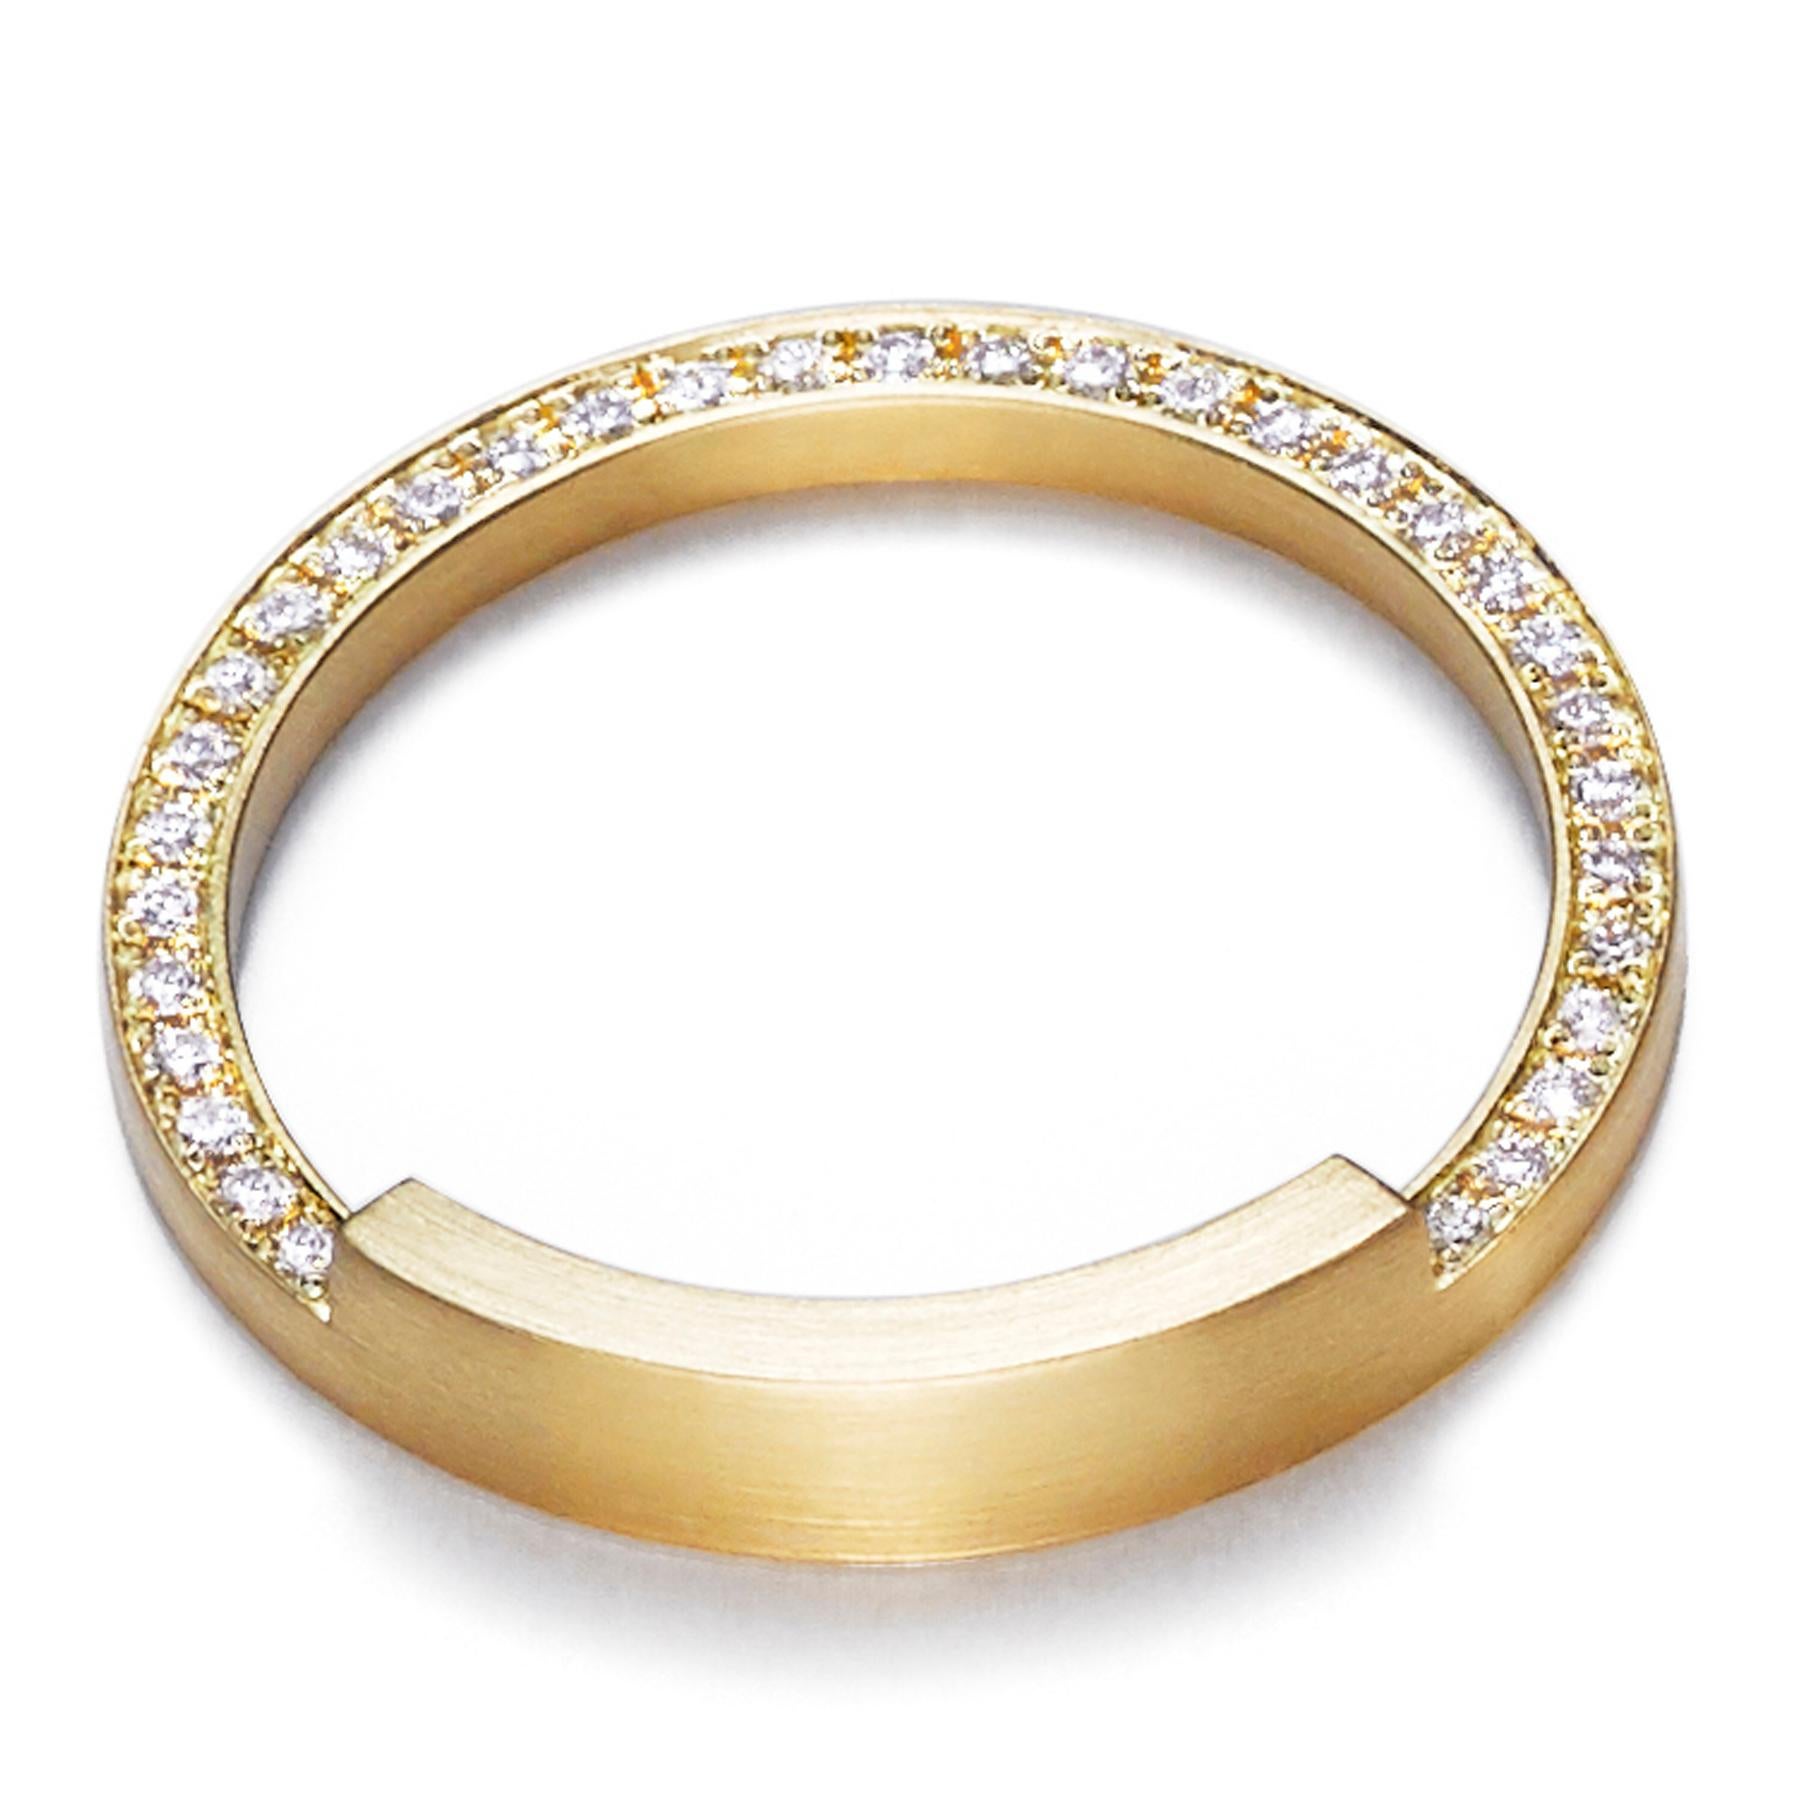 The 'Assemble 05' ring has a square edge band with three quarters of the band narrowed in half and filled with diamonds. Ideal for stacking* with other rings from the 'Assemble' range.

Diamond: 1mm (amount varies depending on ring size)
Band width: